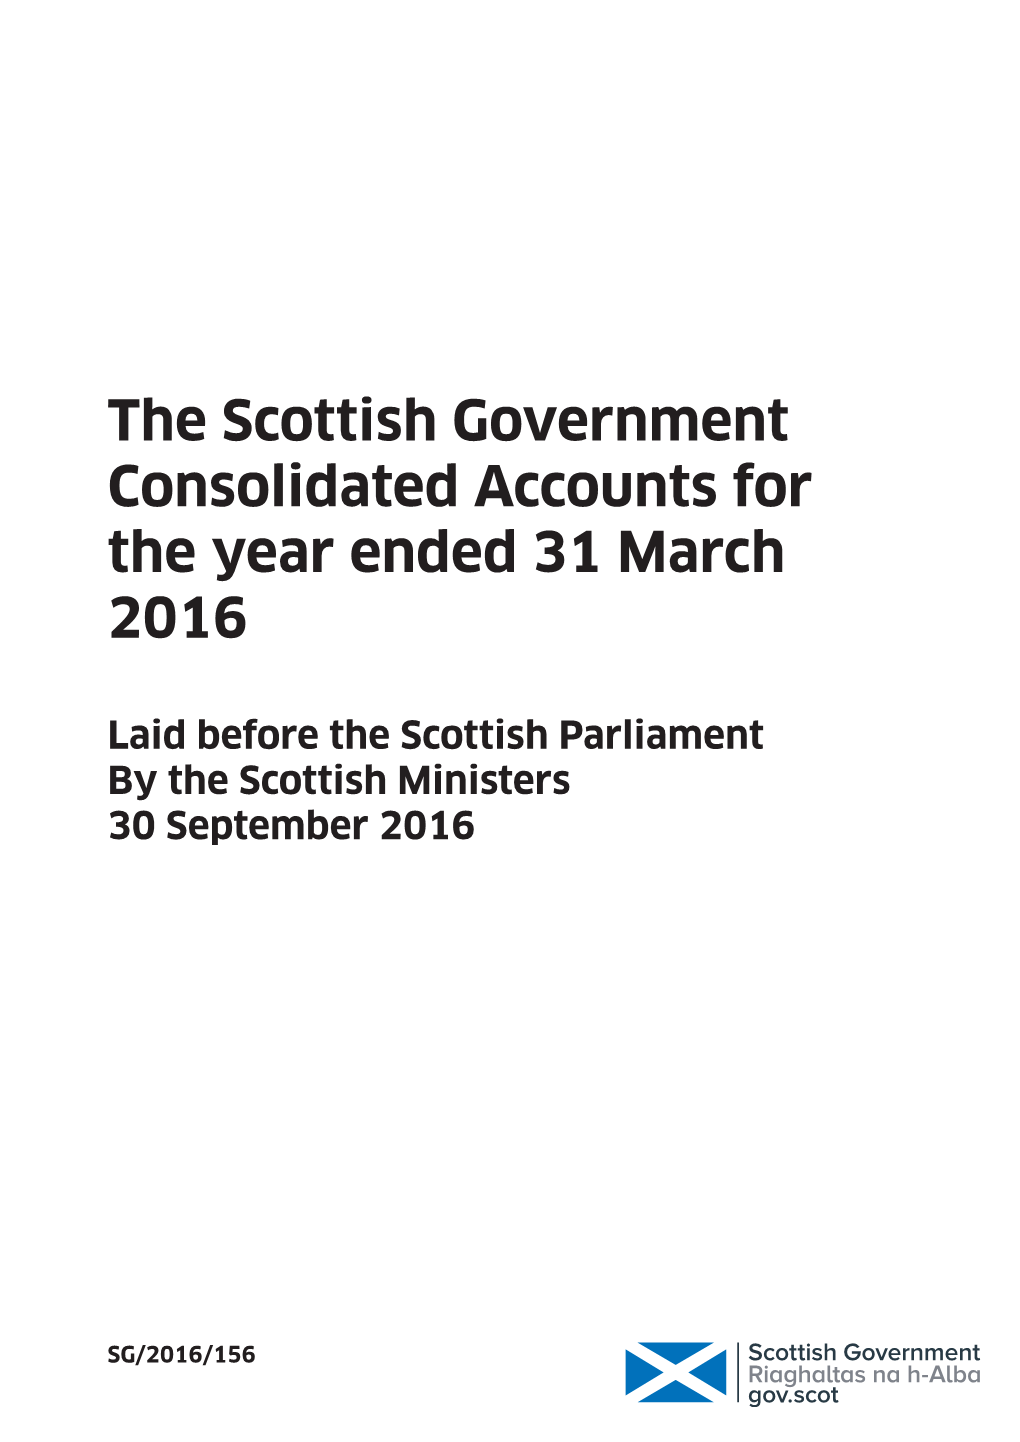 The Scottish Government Consolidated Accounts for the Year Ended 31 March 2016